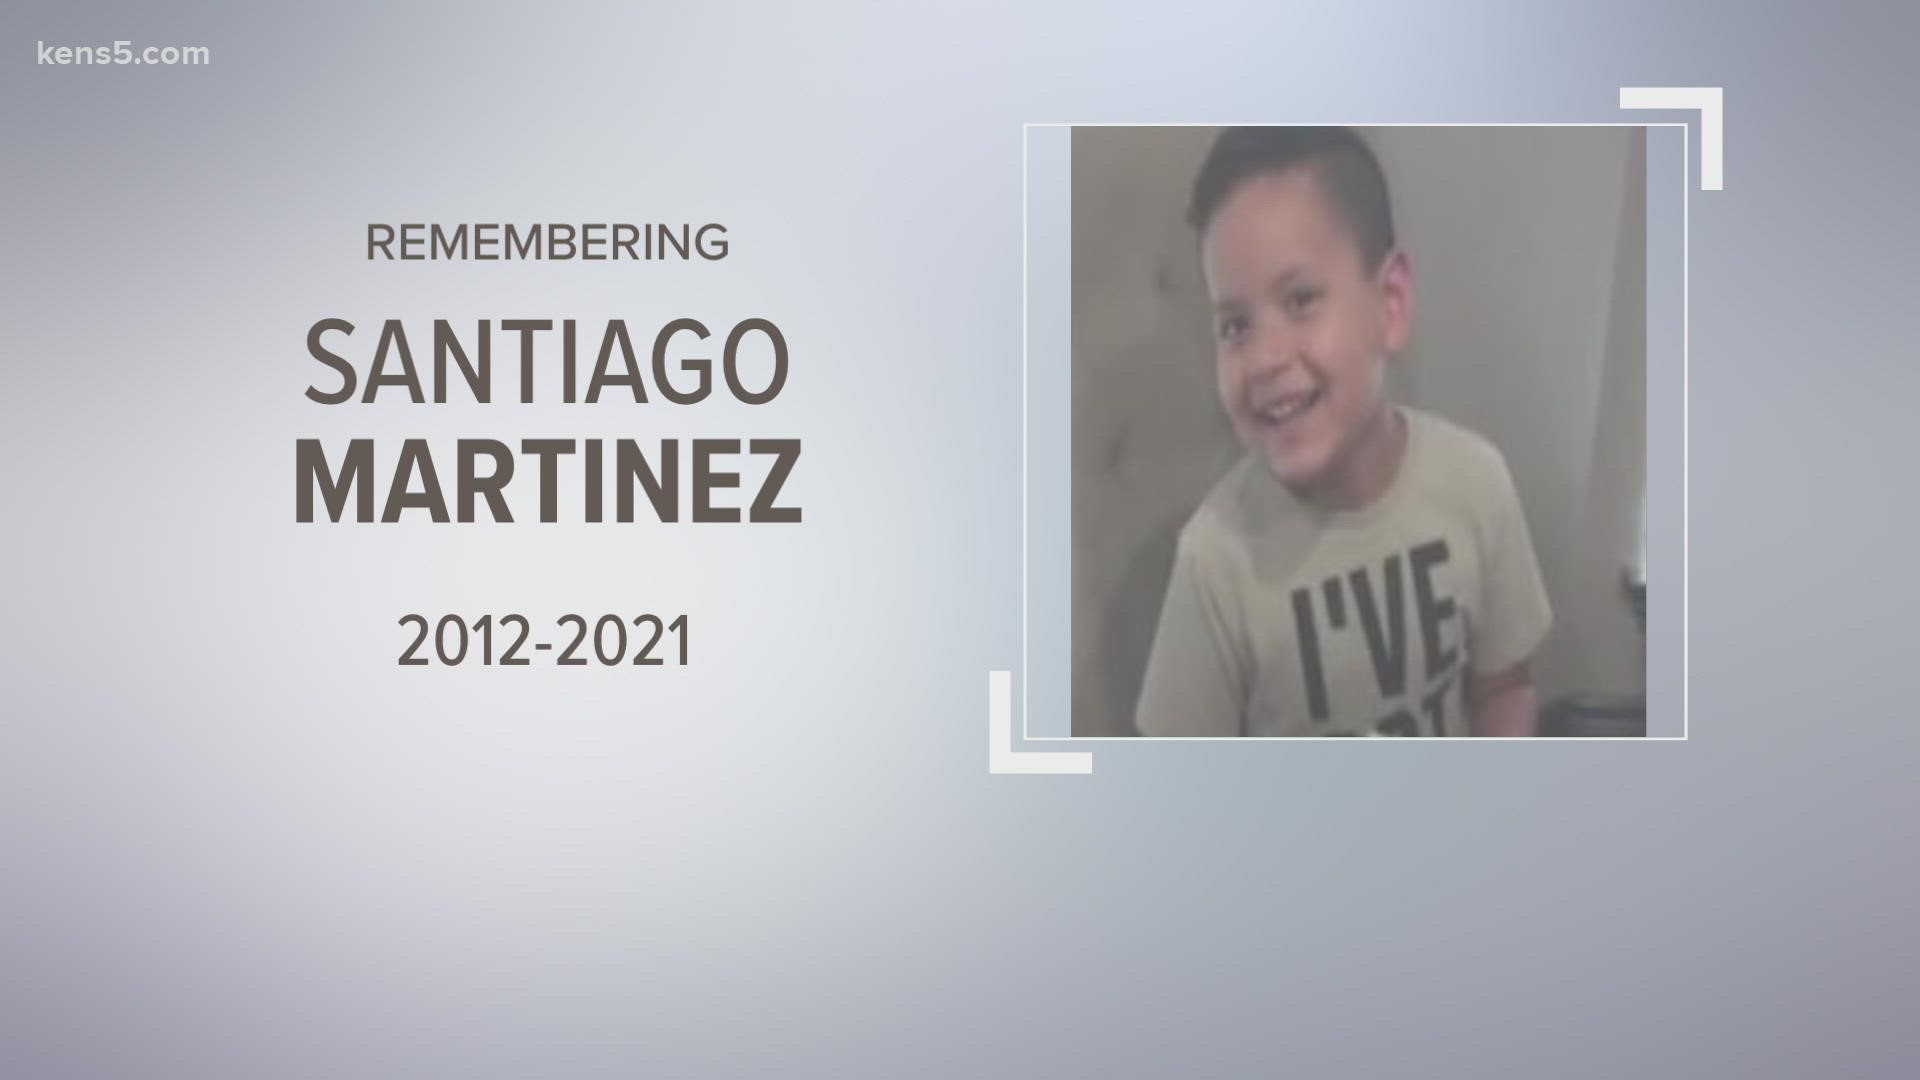 Santiago Martinez was one of three people who were killed while watching the drag racing event in Kerville.